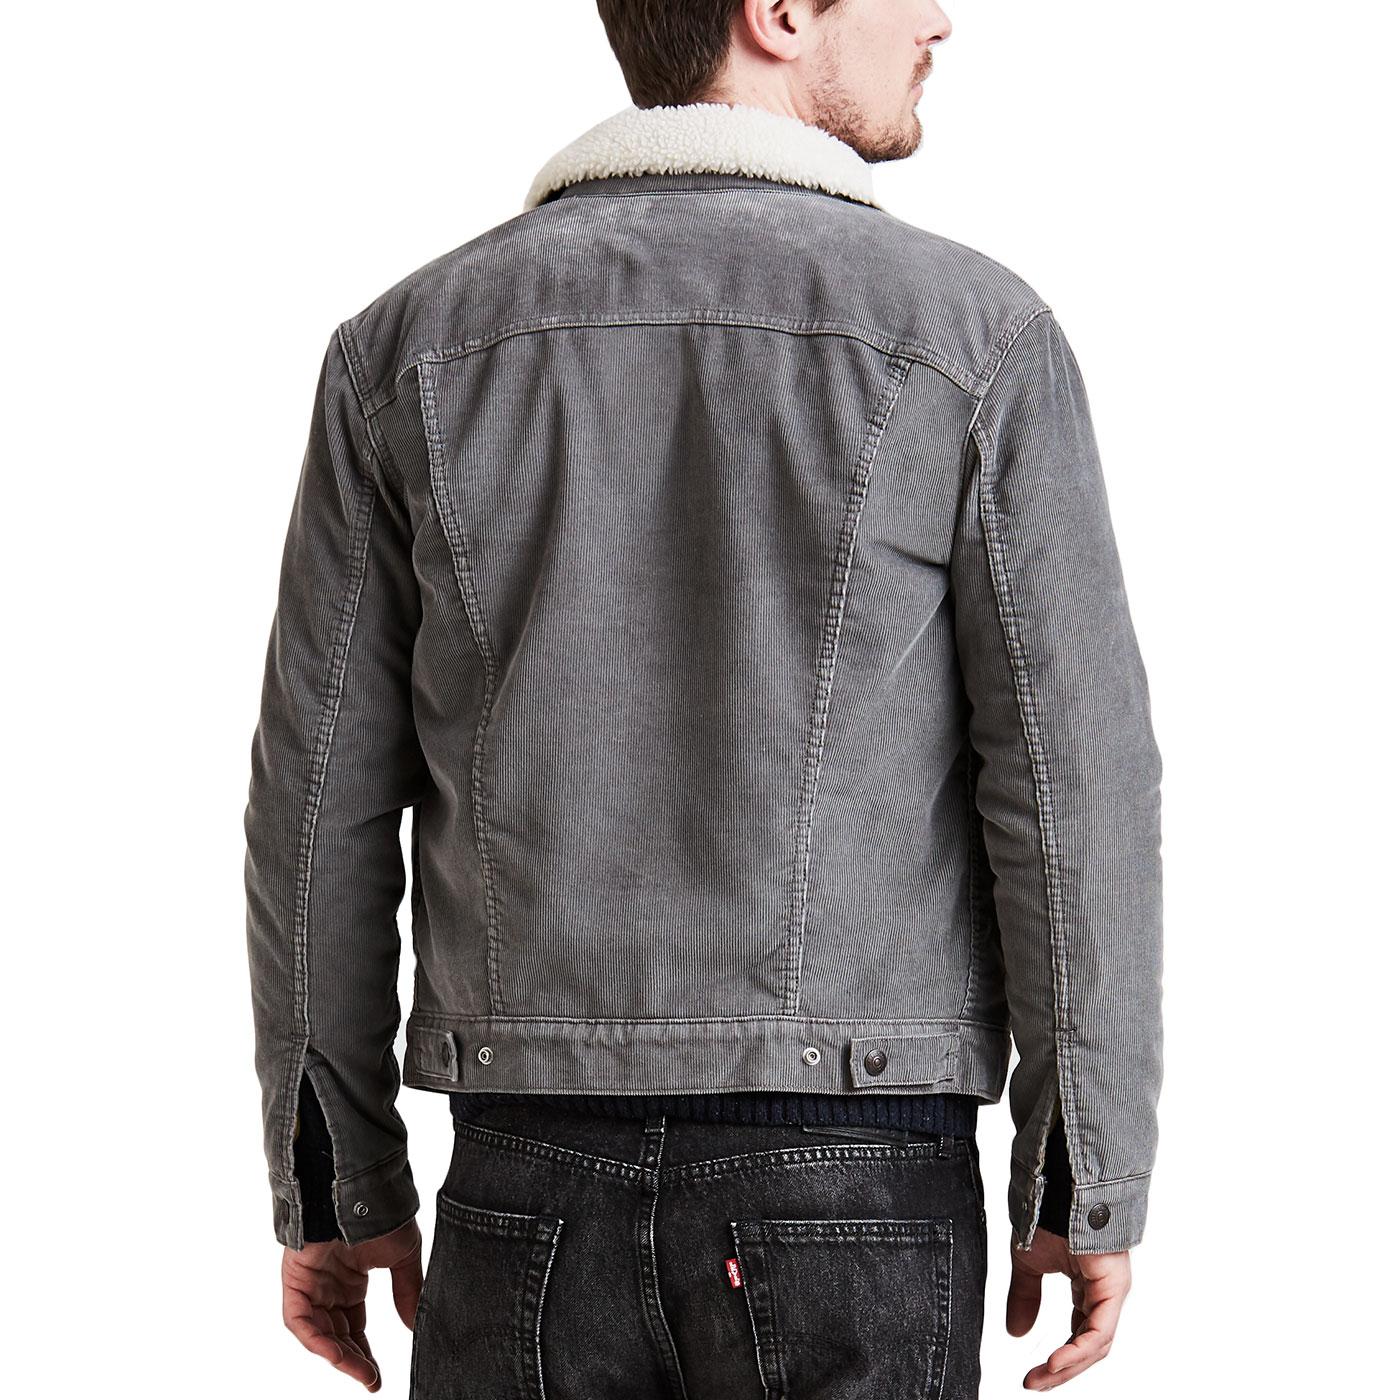 levis pewter cord jacket